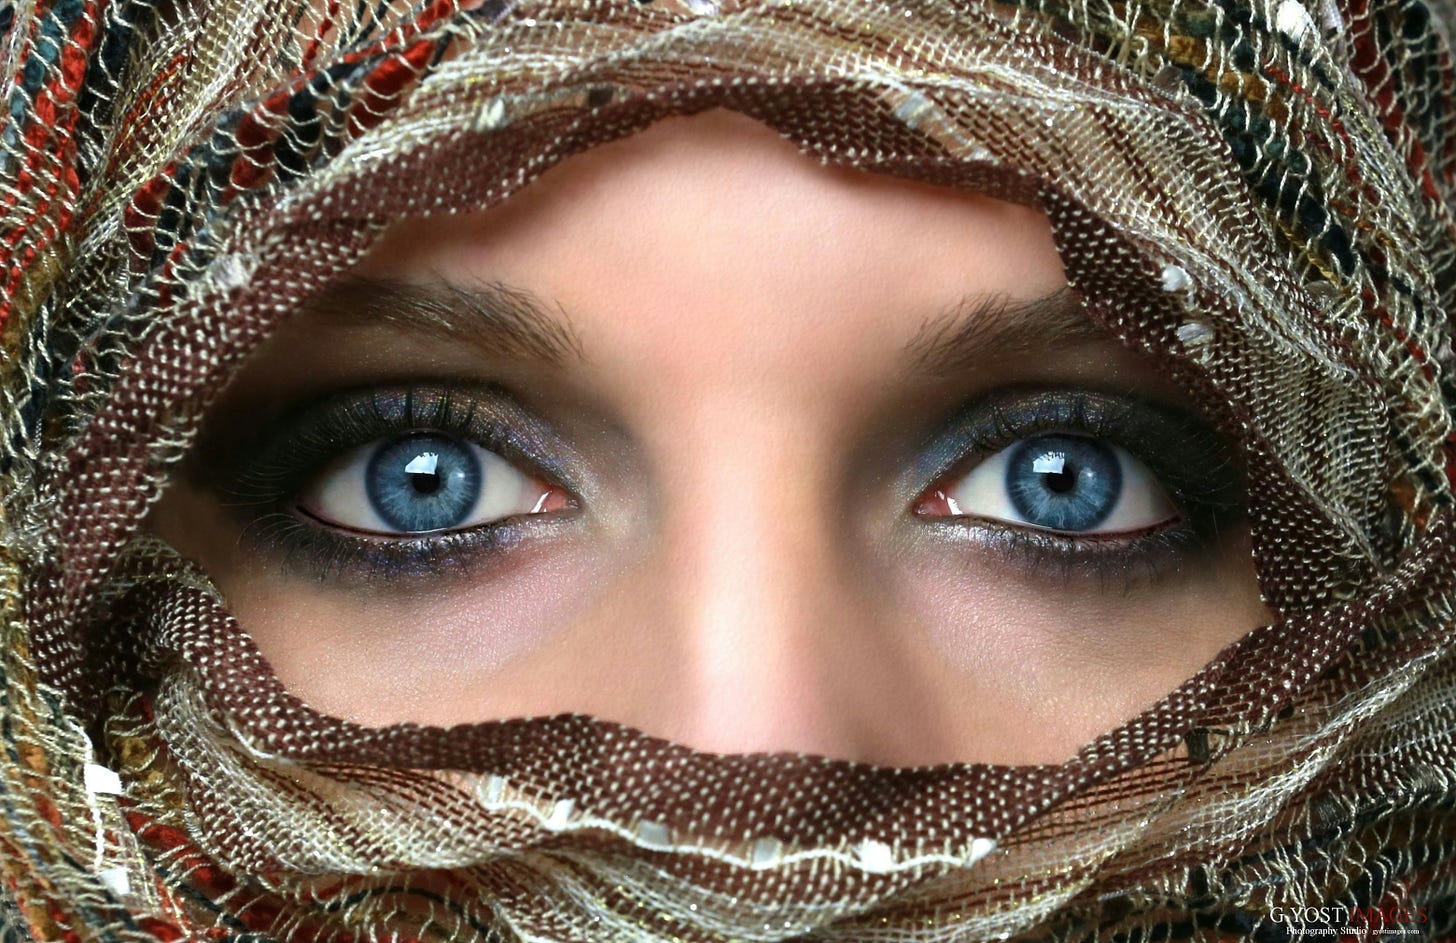 Blue eyes of a woman wearing a brown and black niqab.